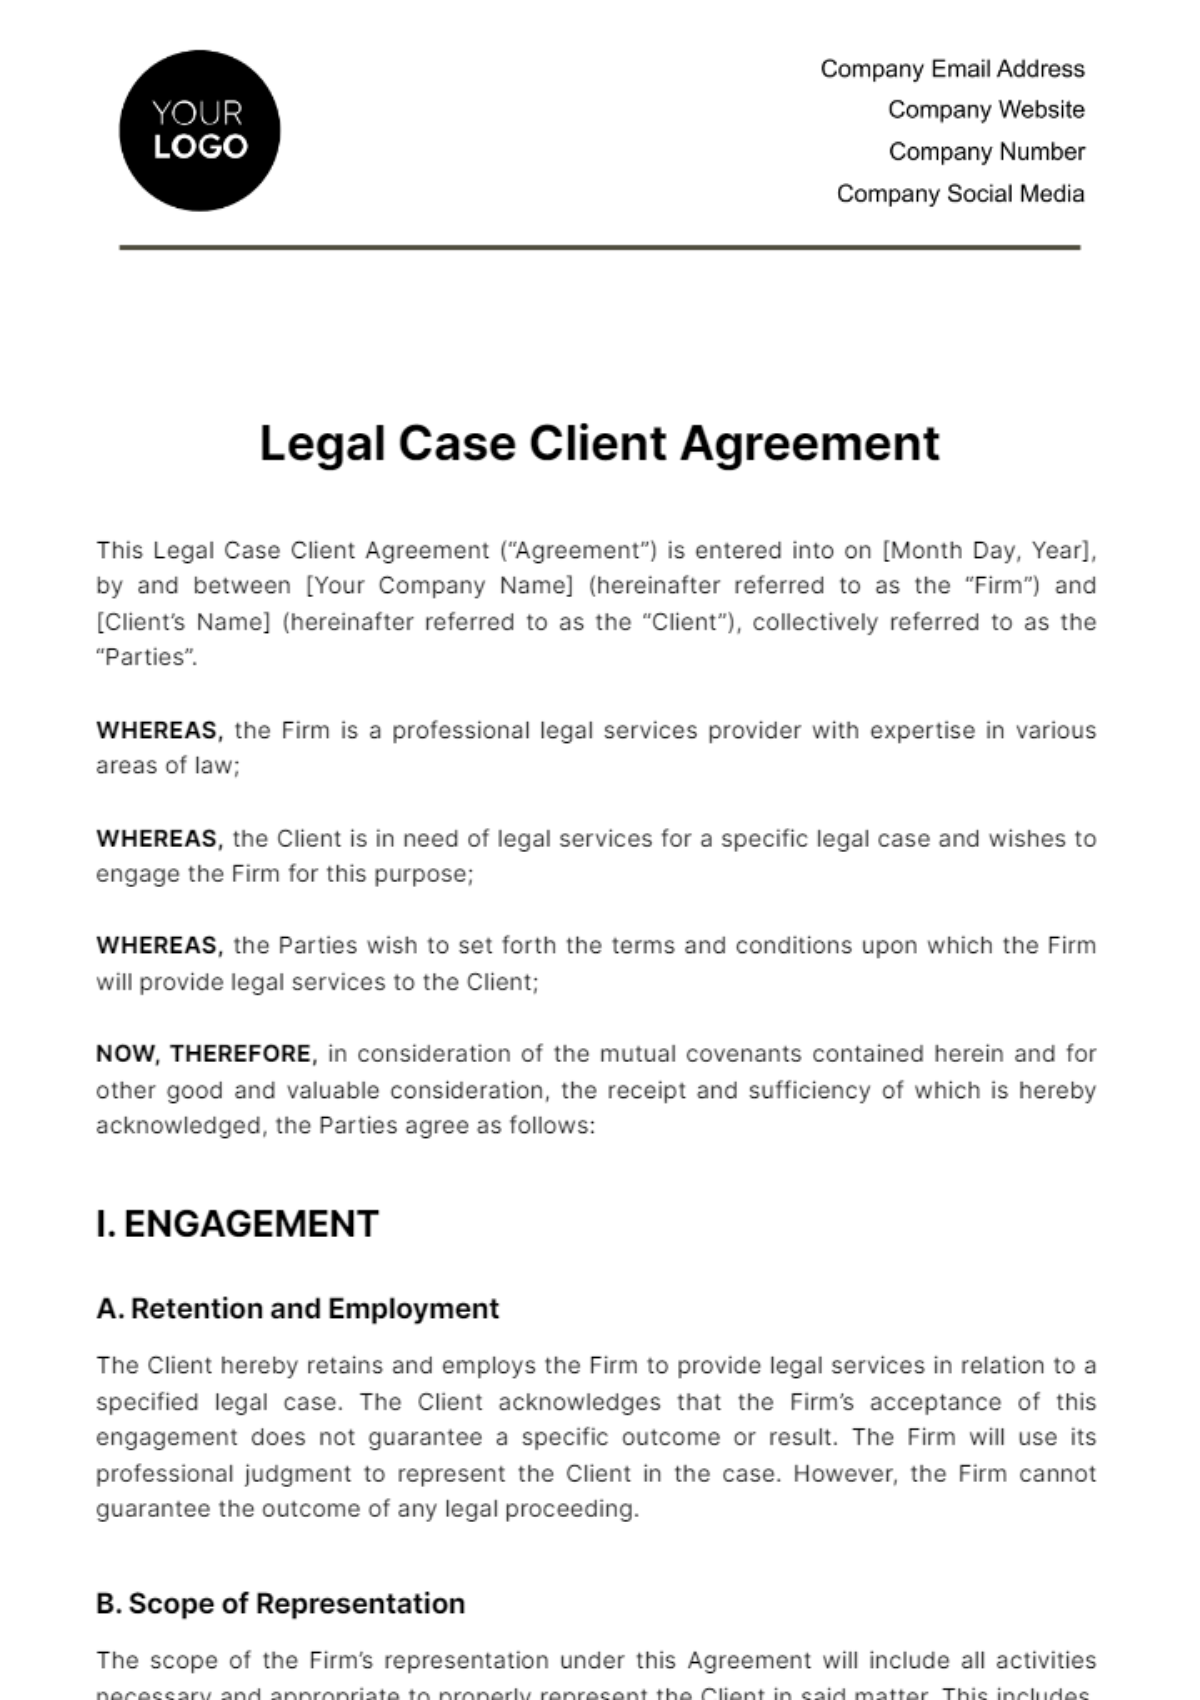 Free Legal Case Client Agreement Template